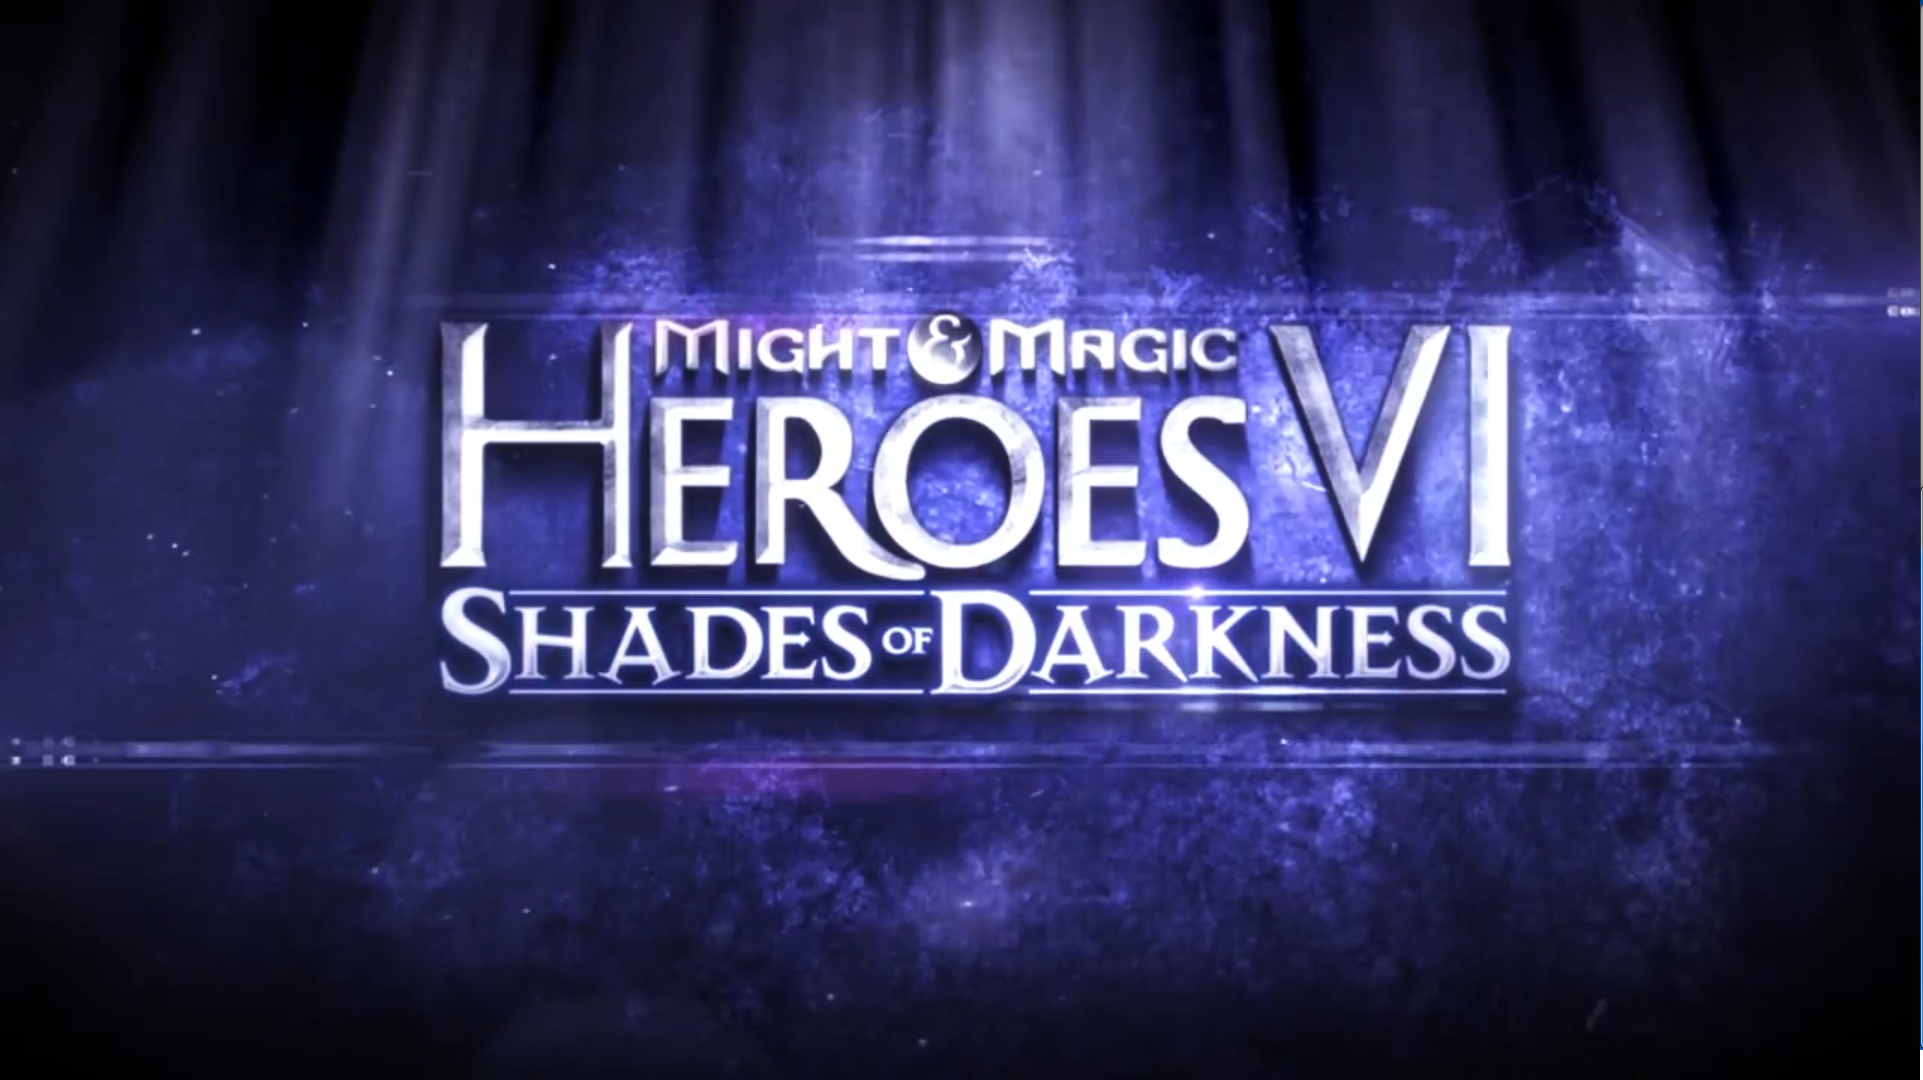 Might & Magic Heroes VI: Shades of Darkness – Story Trailer